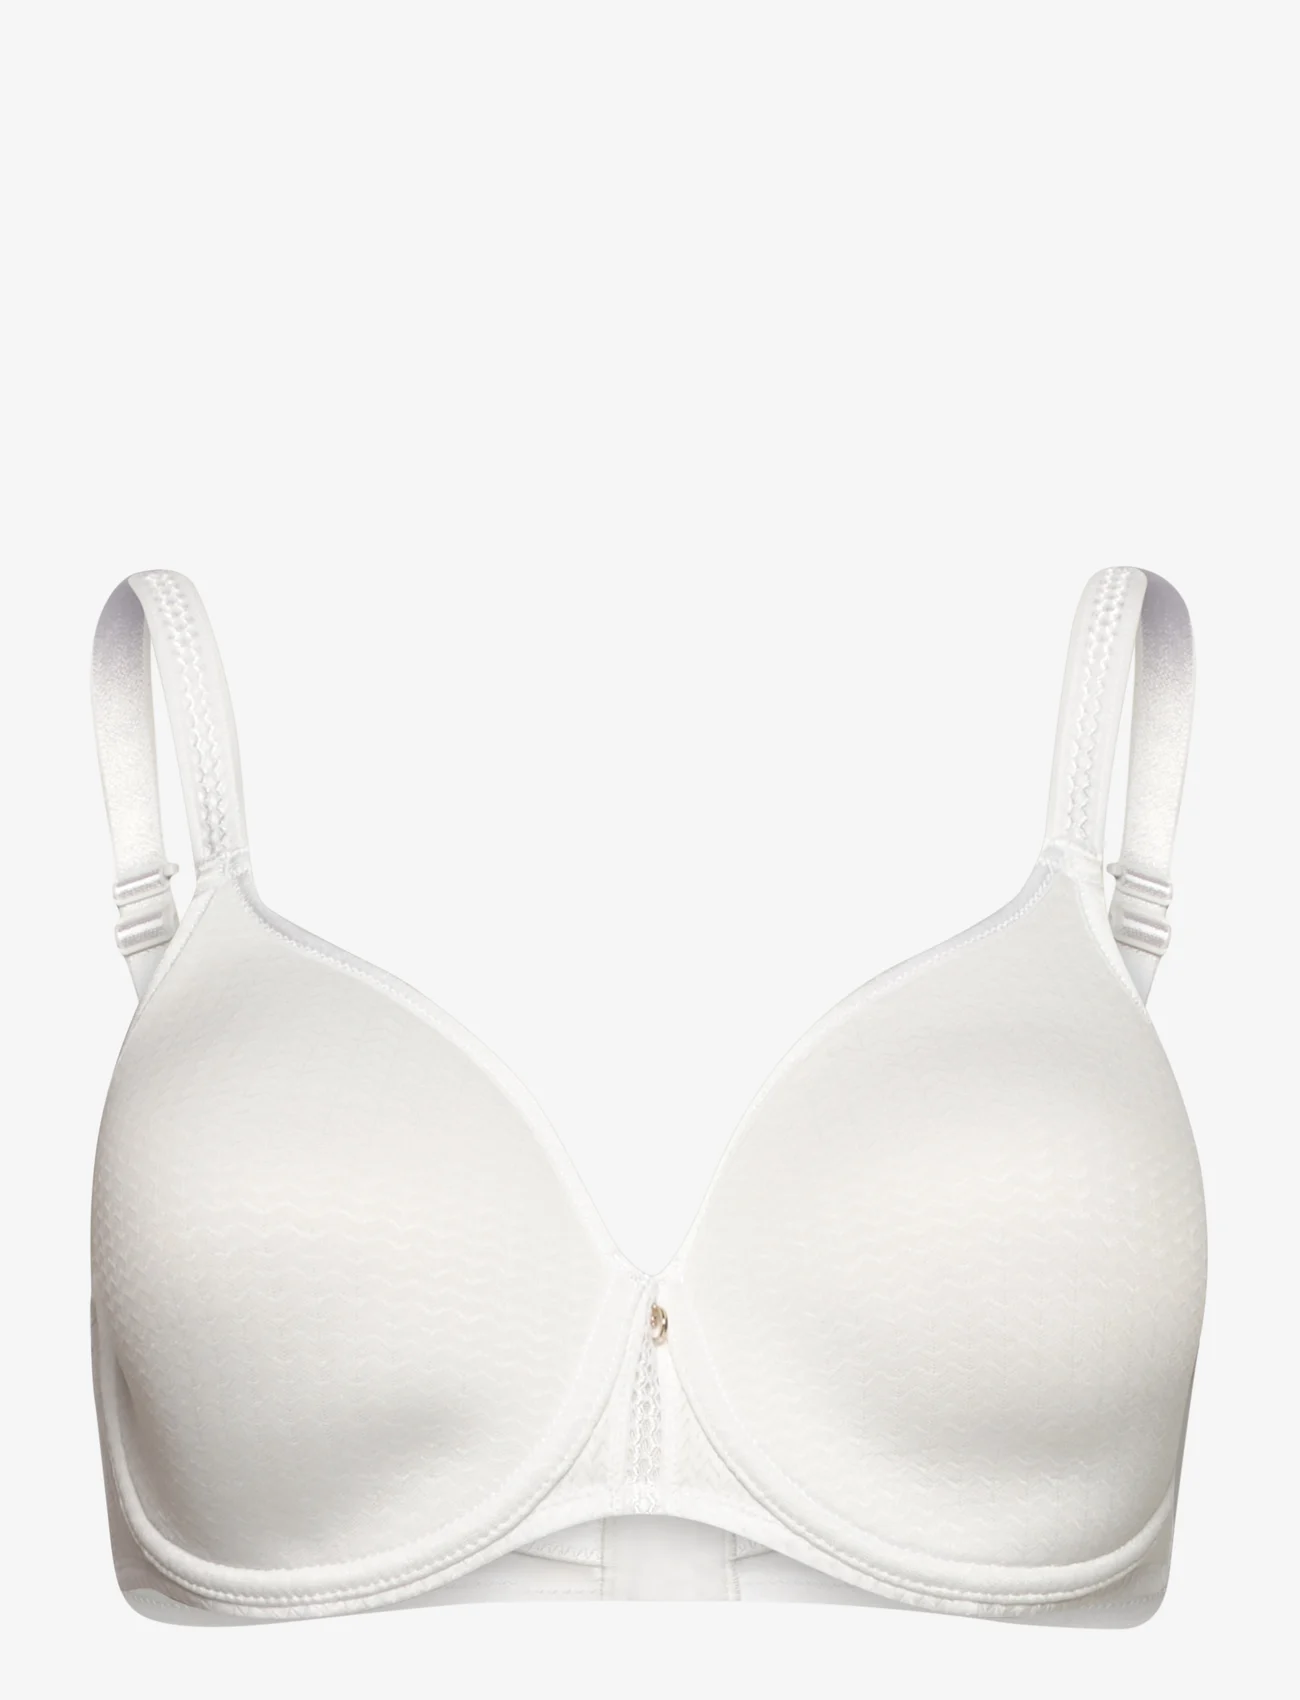 CHANTELLE - Chic Essential Covering spacer bra - helkupa bh:ar - white - 0